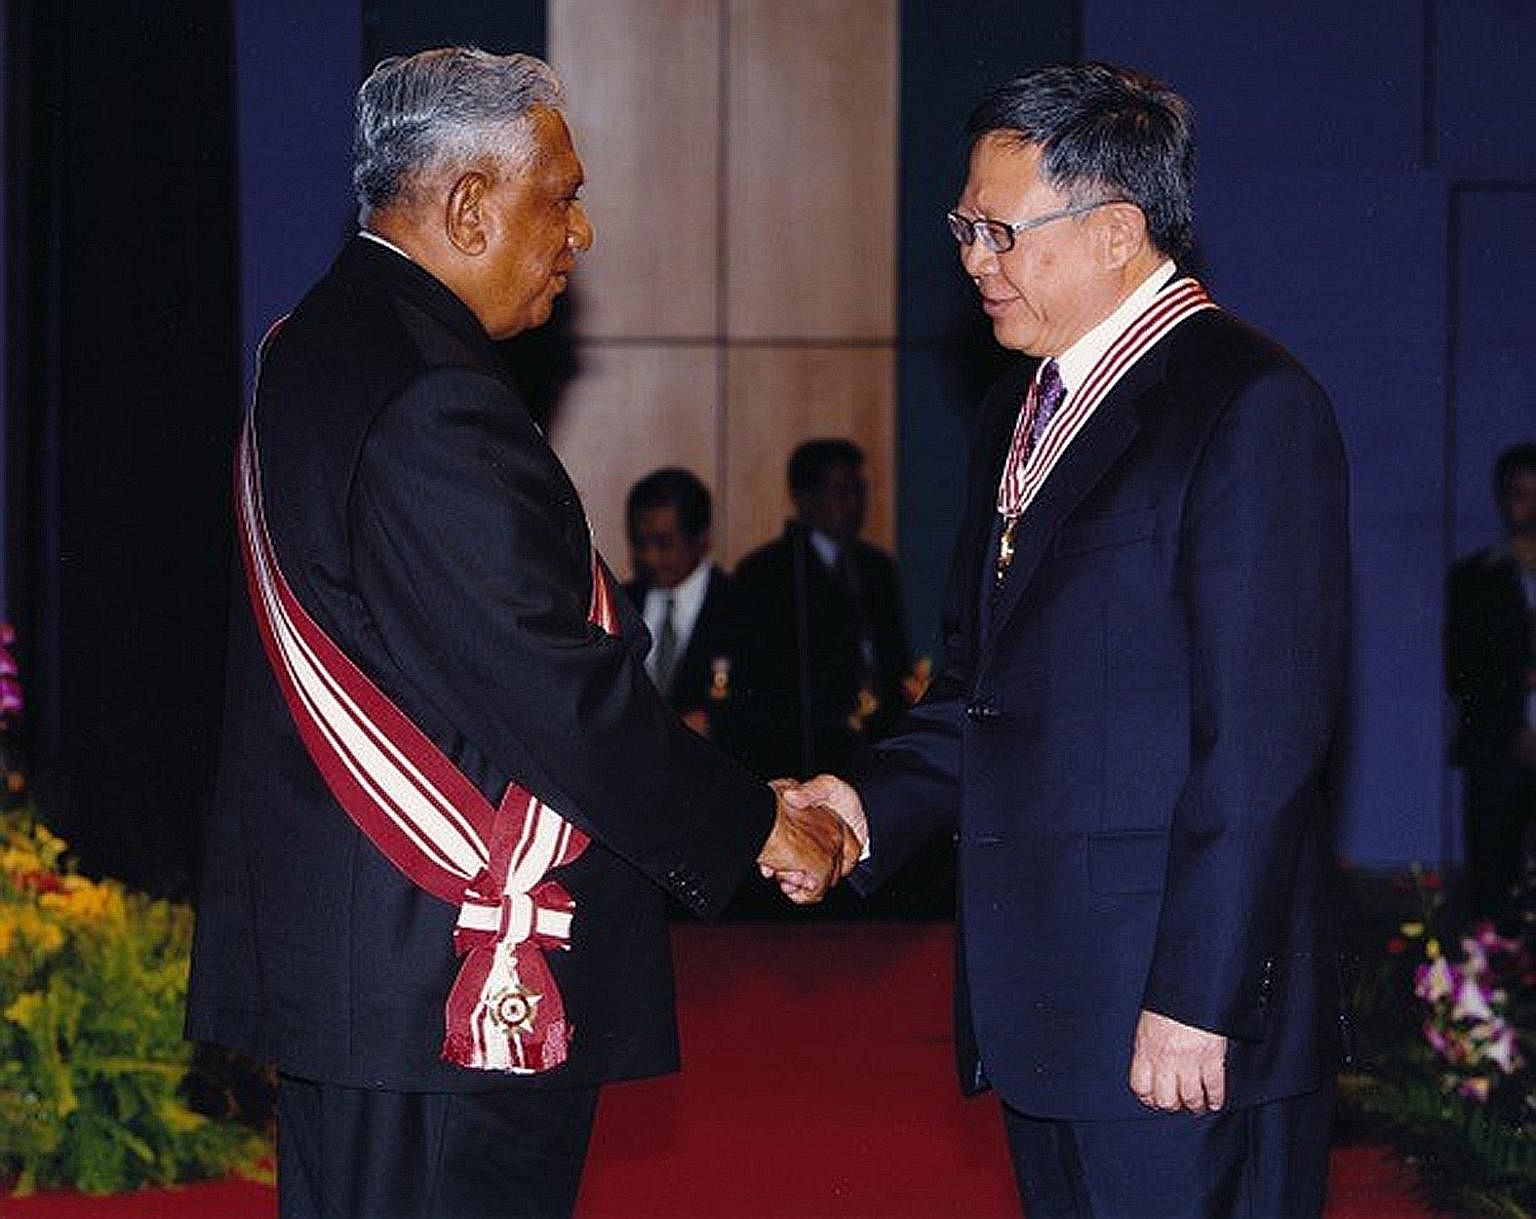 Mr Eddie Teo receiving the Distinguished Service Order from then President S R Nathan in 2006. Mr Teo, who has been awarded the Order of Nila Utama (First Class) this year, said Mr Nathan "taught me the values, discipline and instincts required for p